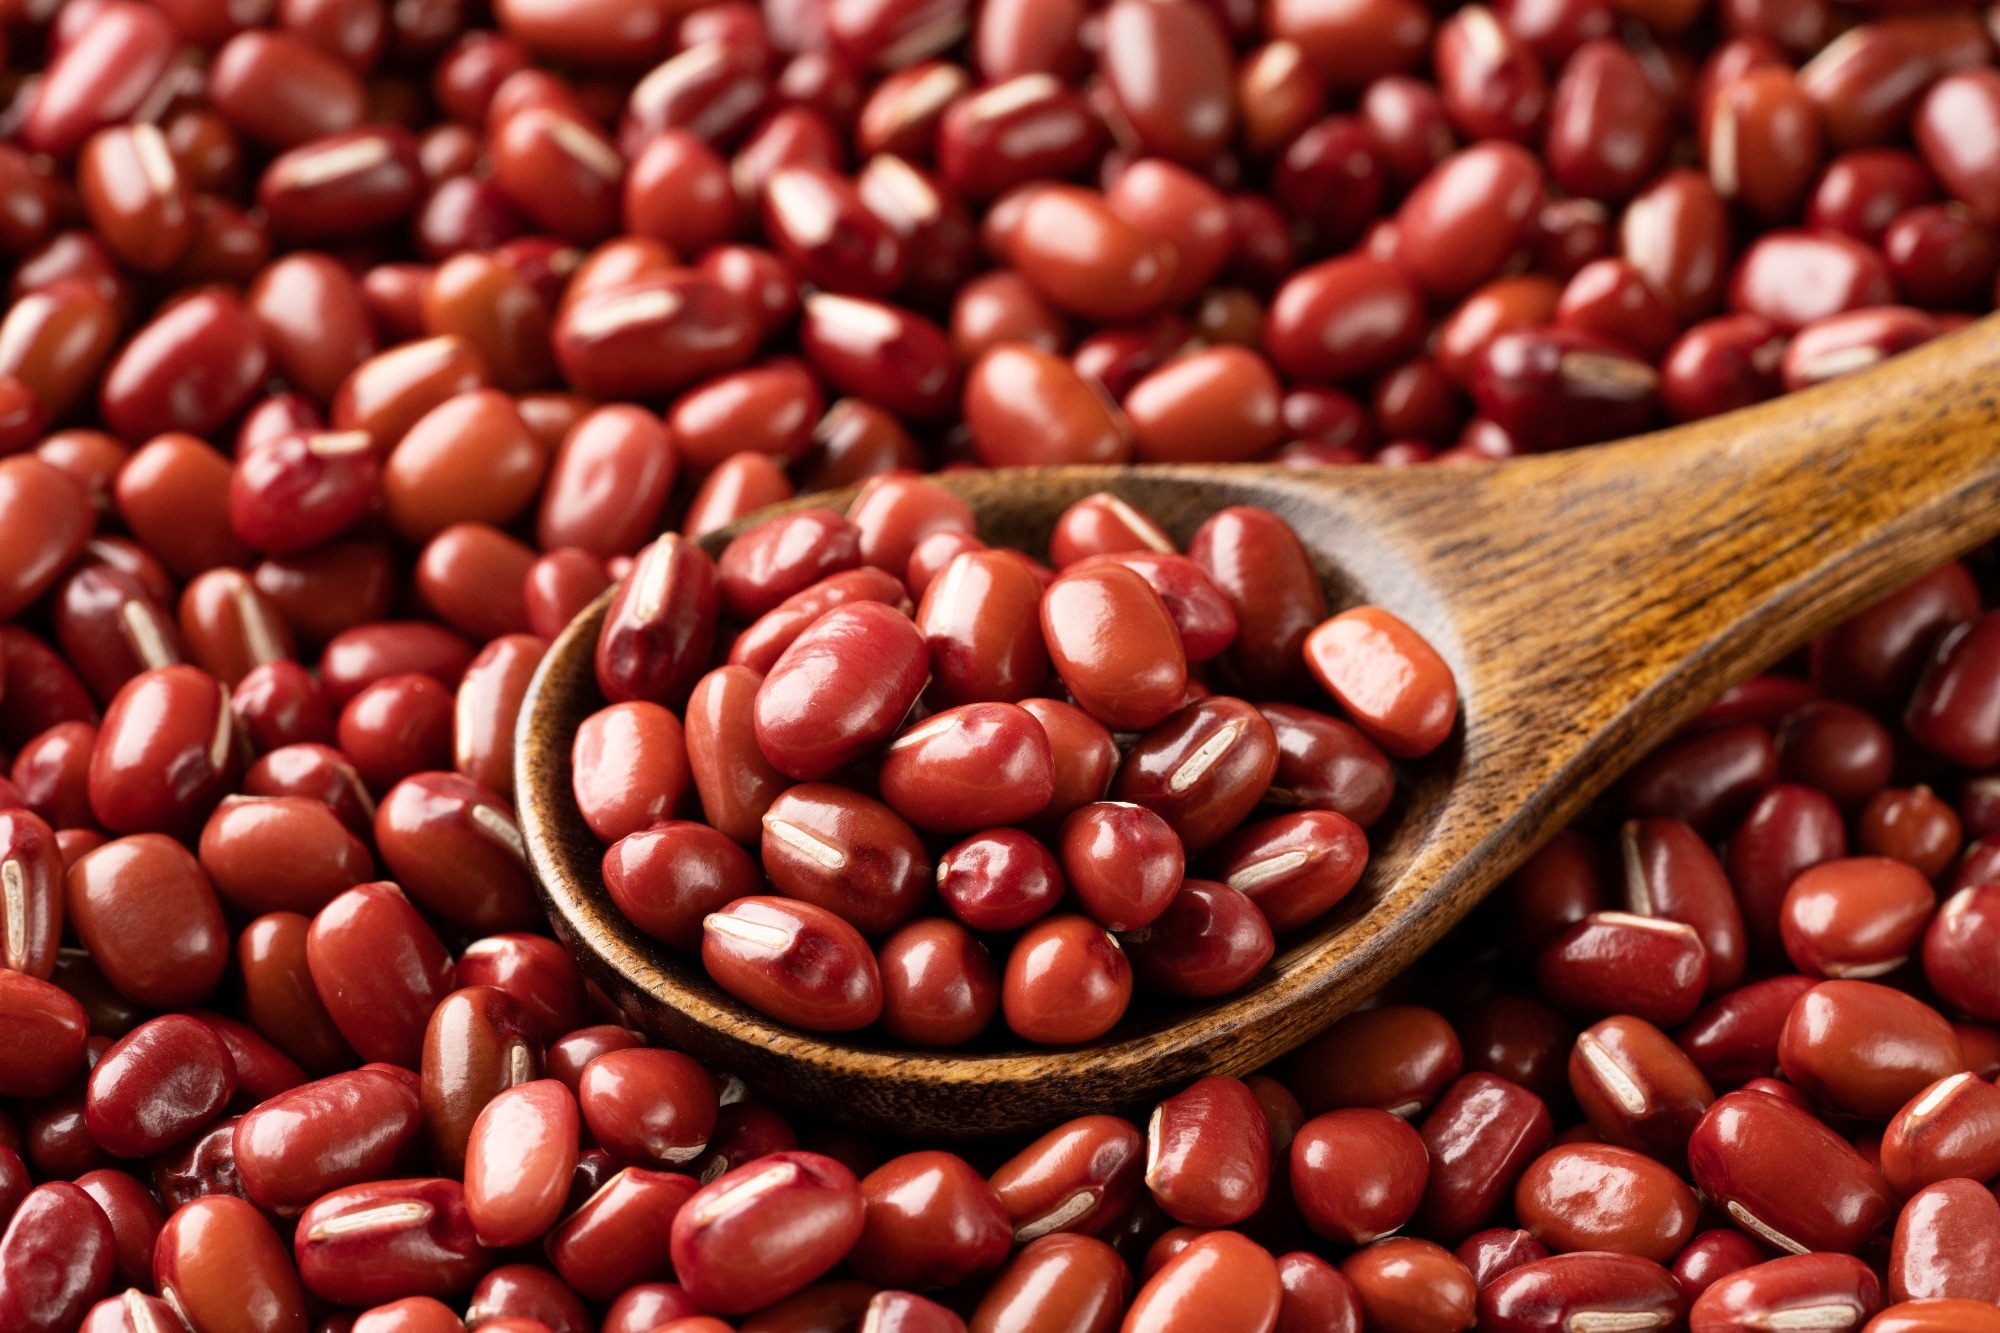 Study: The Potential of the Adzuki Bean (Vigna angularis) and Its Bioactive Compounds in Managing Type 2 Diabetes and Glucose Metabolism: A Narrative Review. Image Credit: Hanasaki/Shutterstock.com